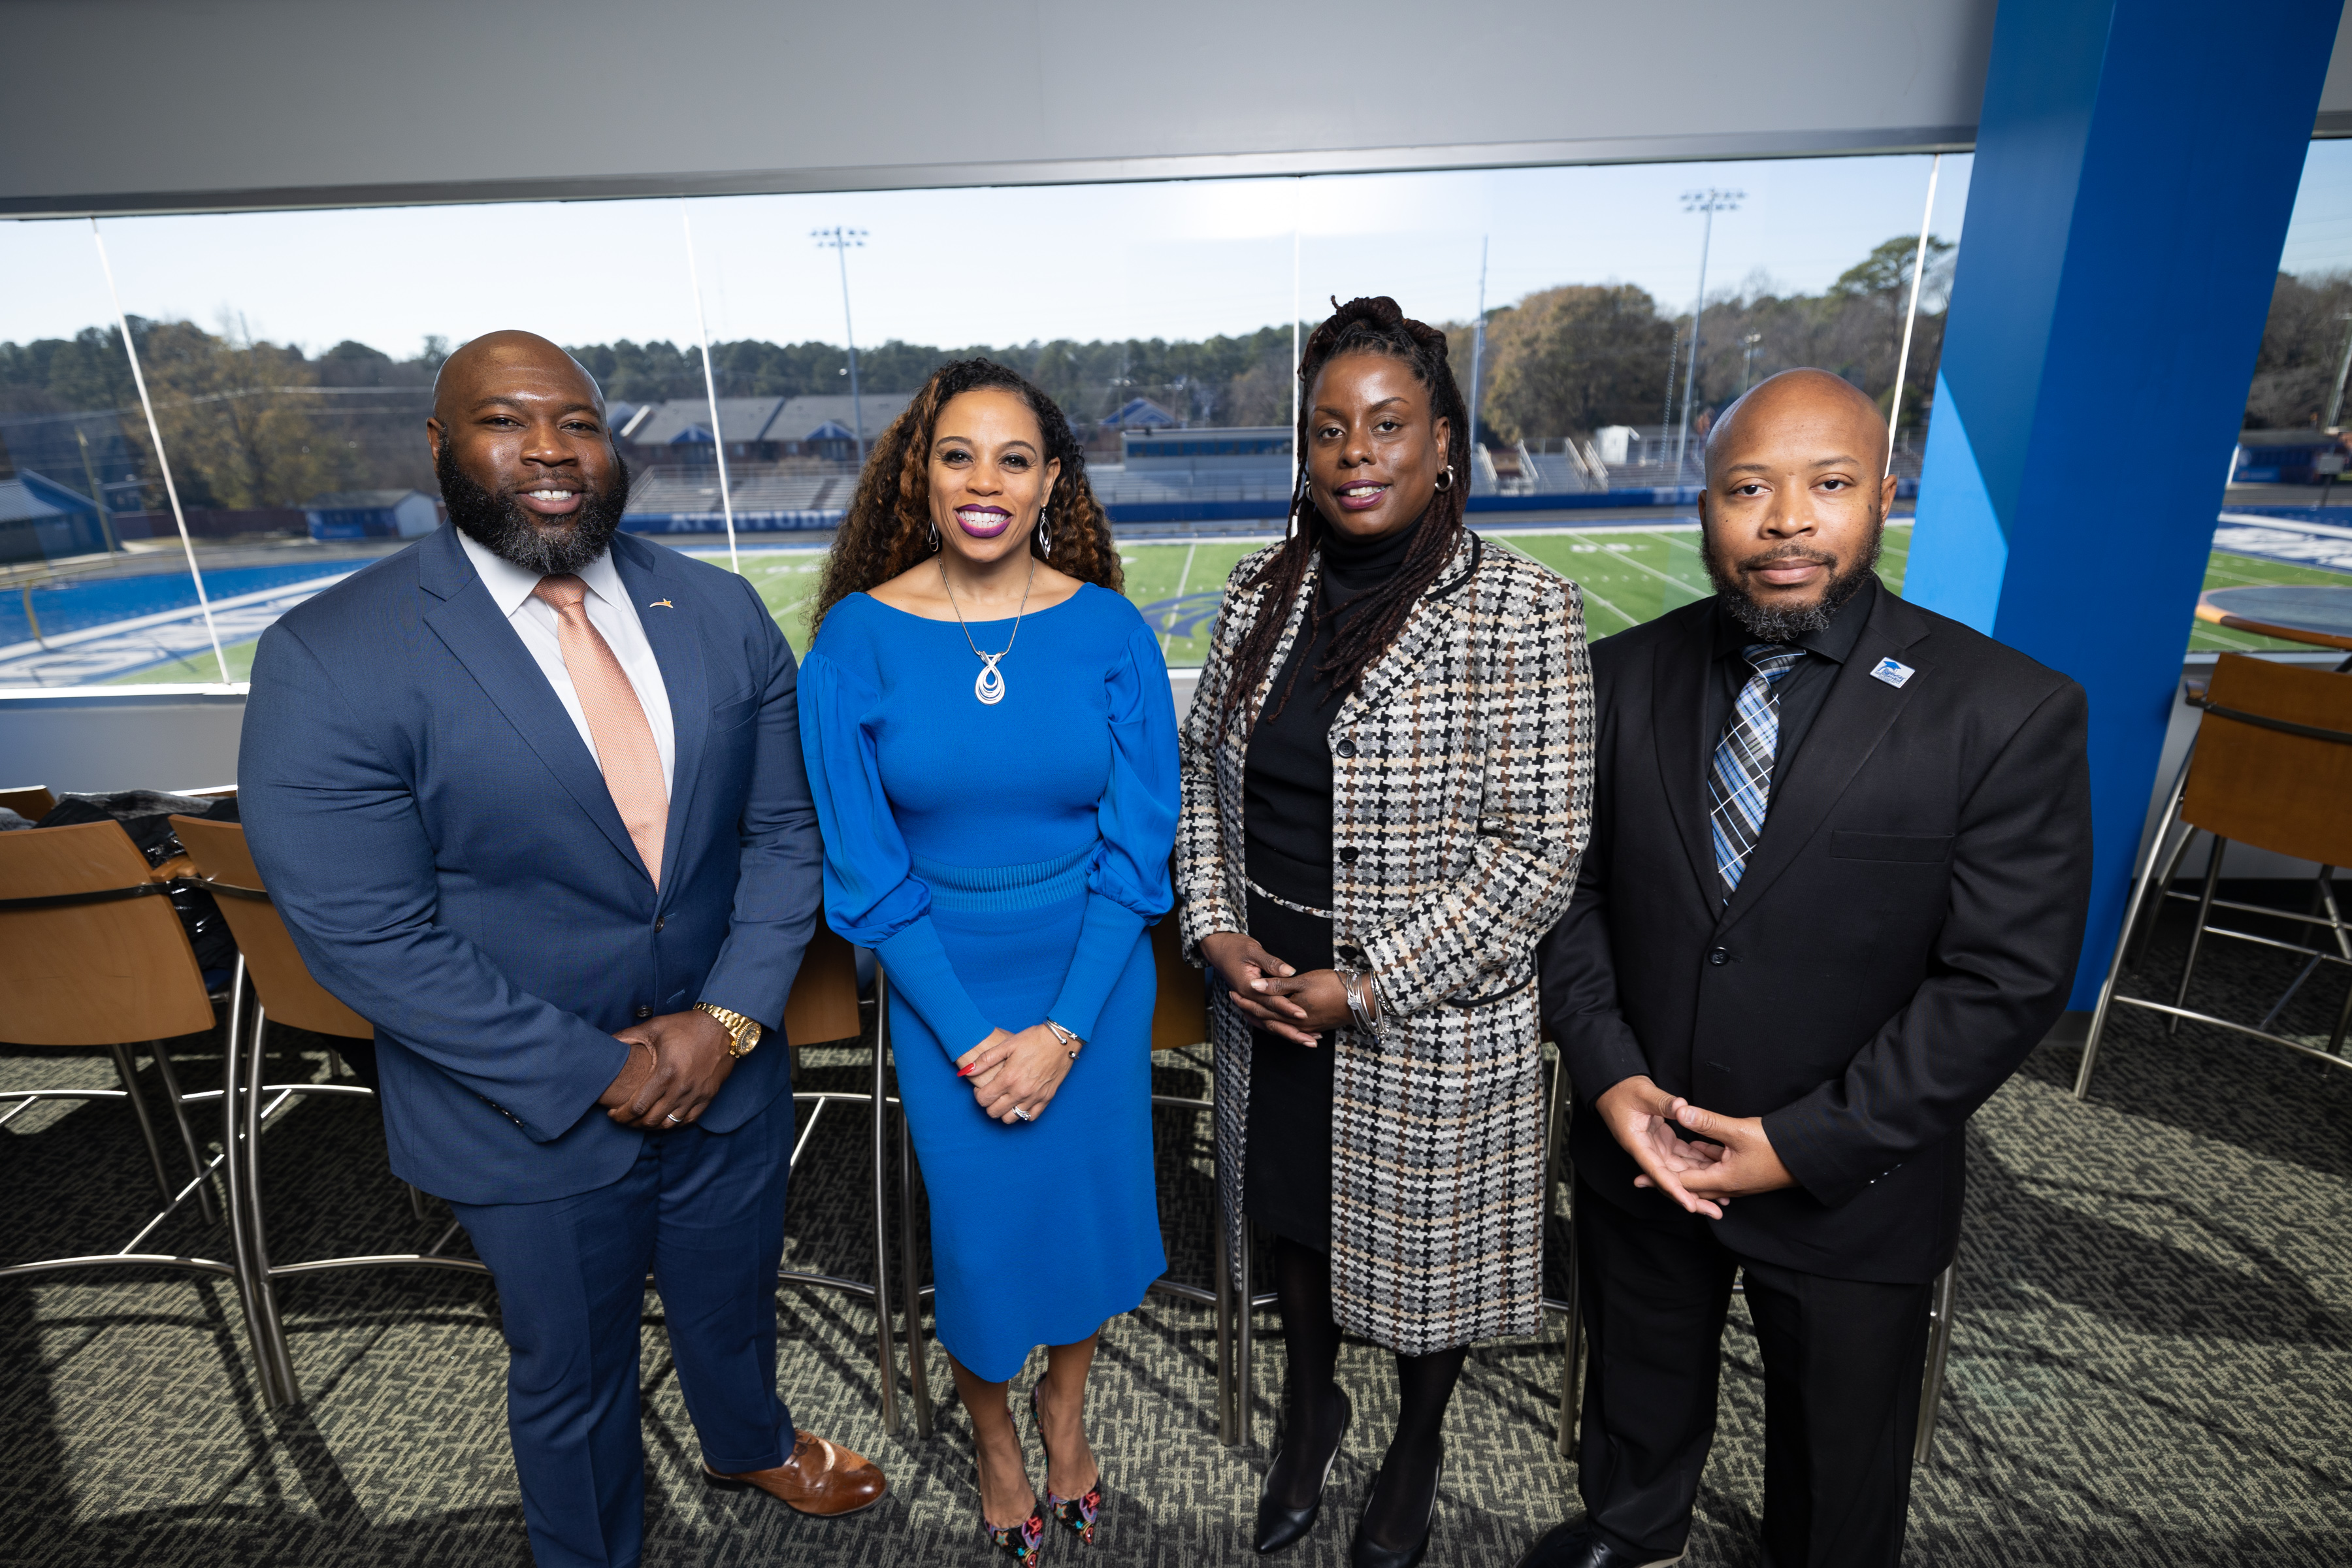 Left to Right: Mose Harris (Pathways to Public Service Program Manager), Lisa Lewis Person (ONC's Chief Operating Officer), FSU's Dr. Katanya Foust and Roderick Smith.